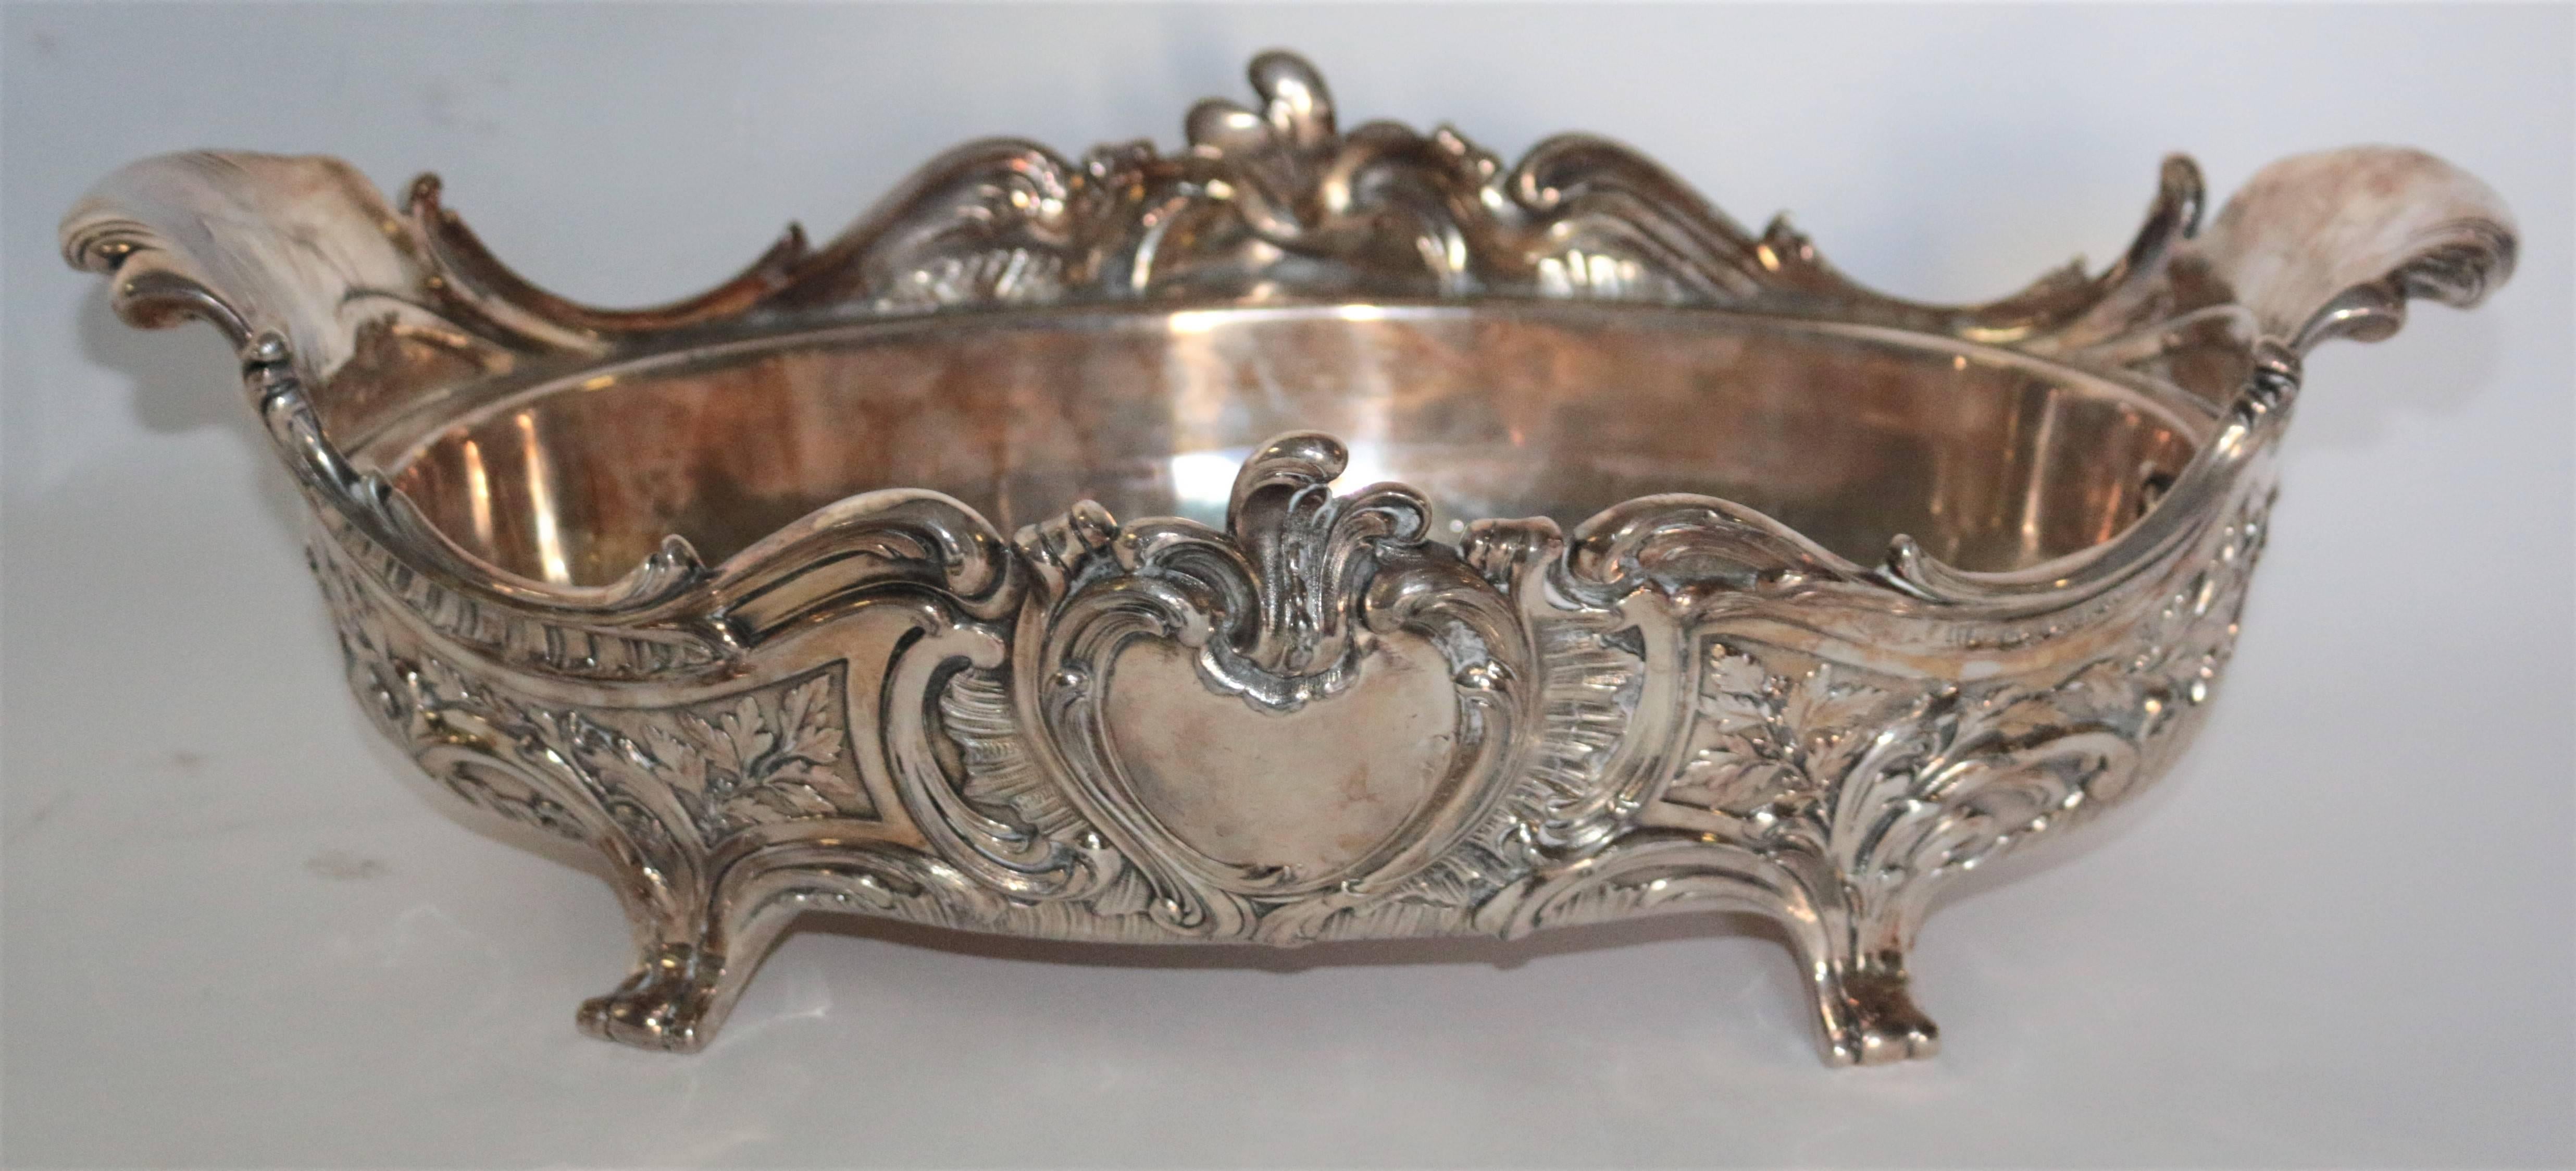 A silver plated center bowl by Christolfe stamped to underside. With original liner. Overall good condition with wear and plate loss to liner.